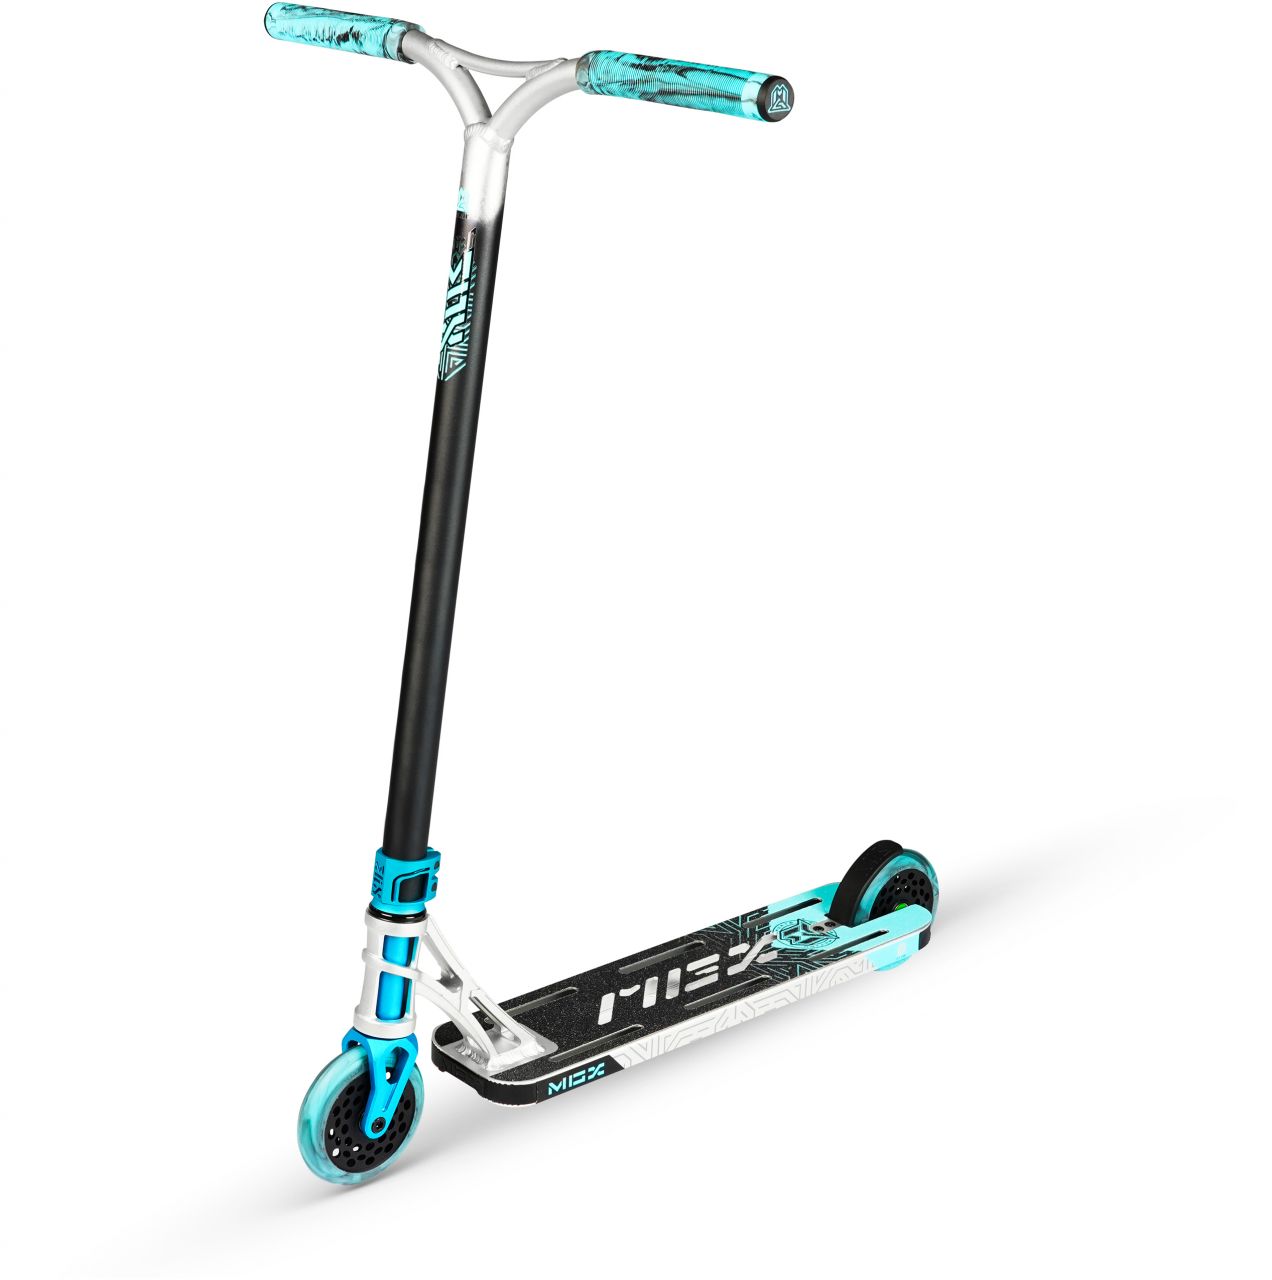 MGP Freestyle Scooter | MGX Extreme E1 | Silber-türkis